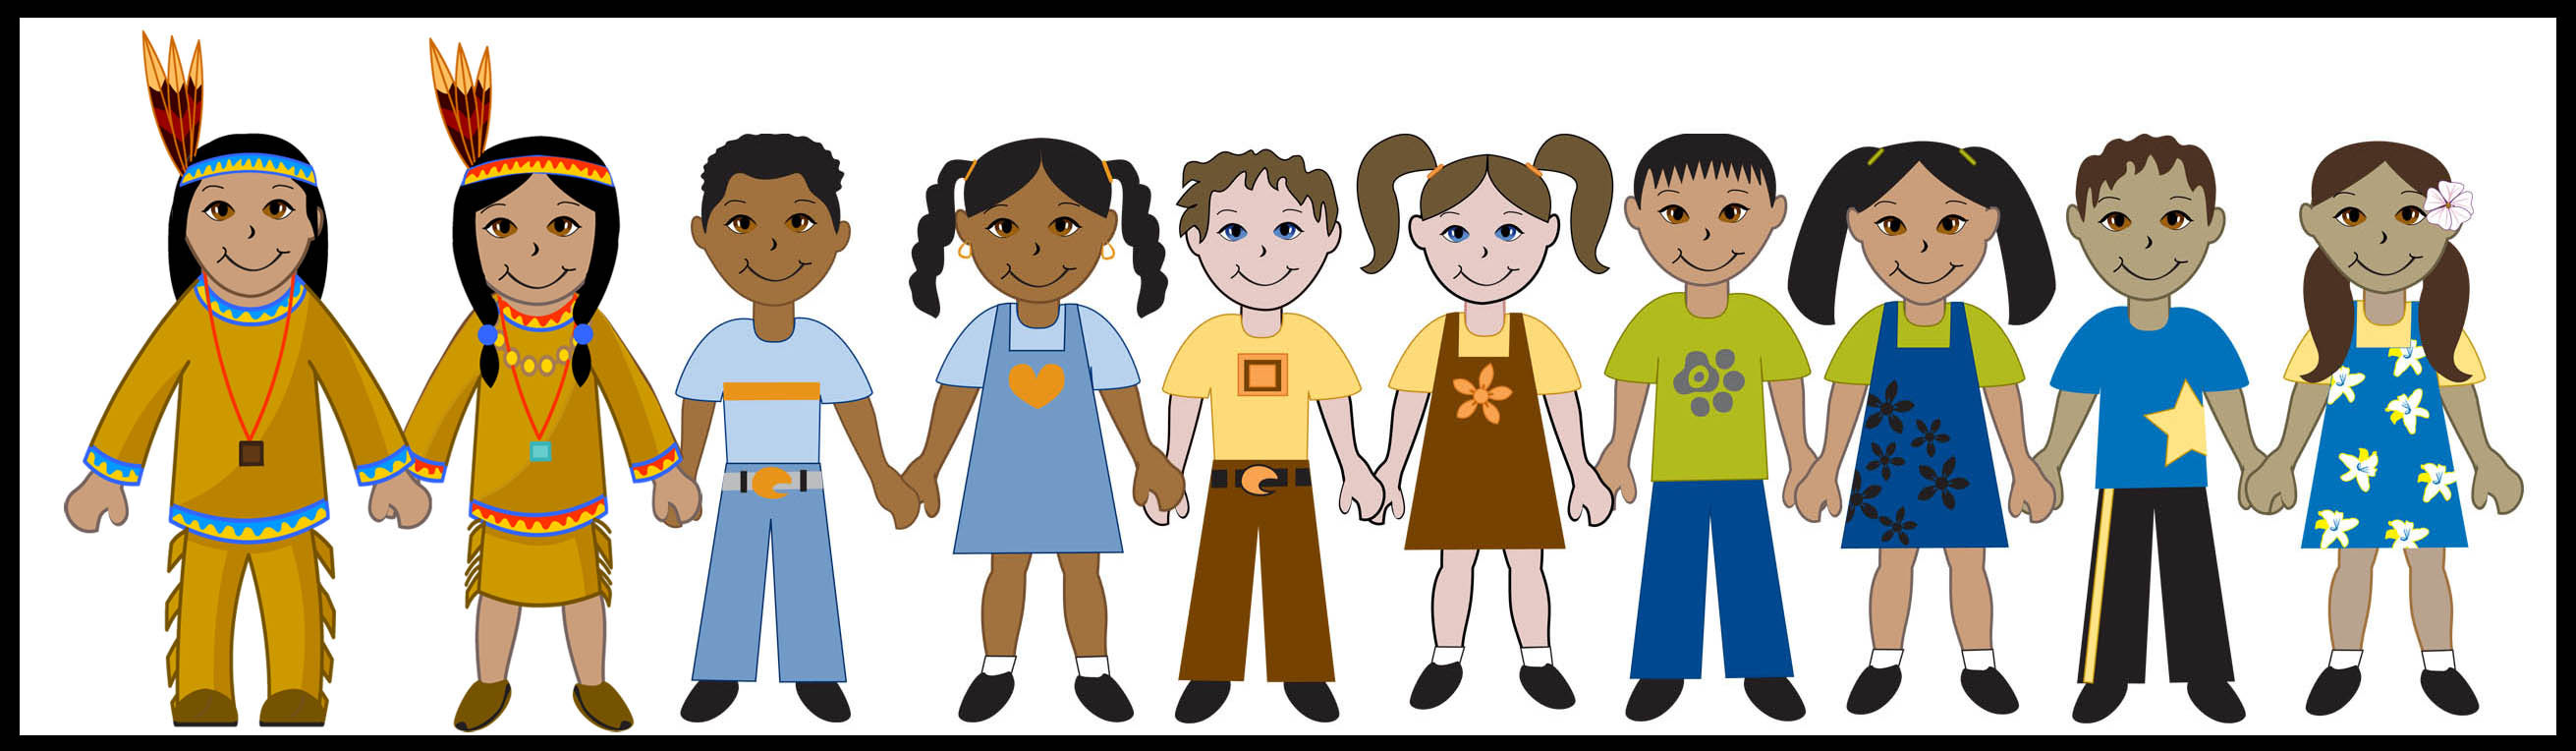 Children Image Png Clipart